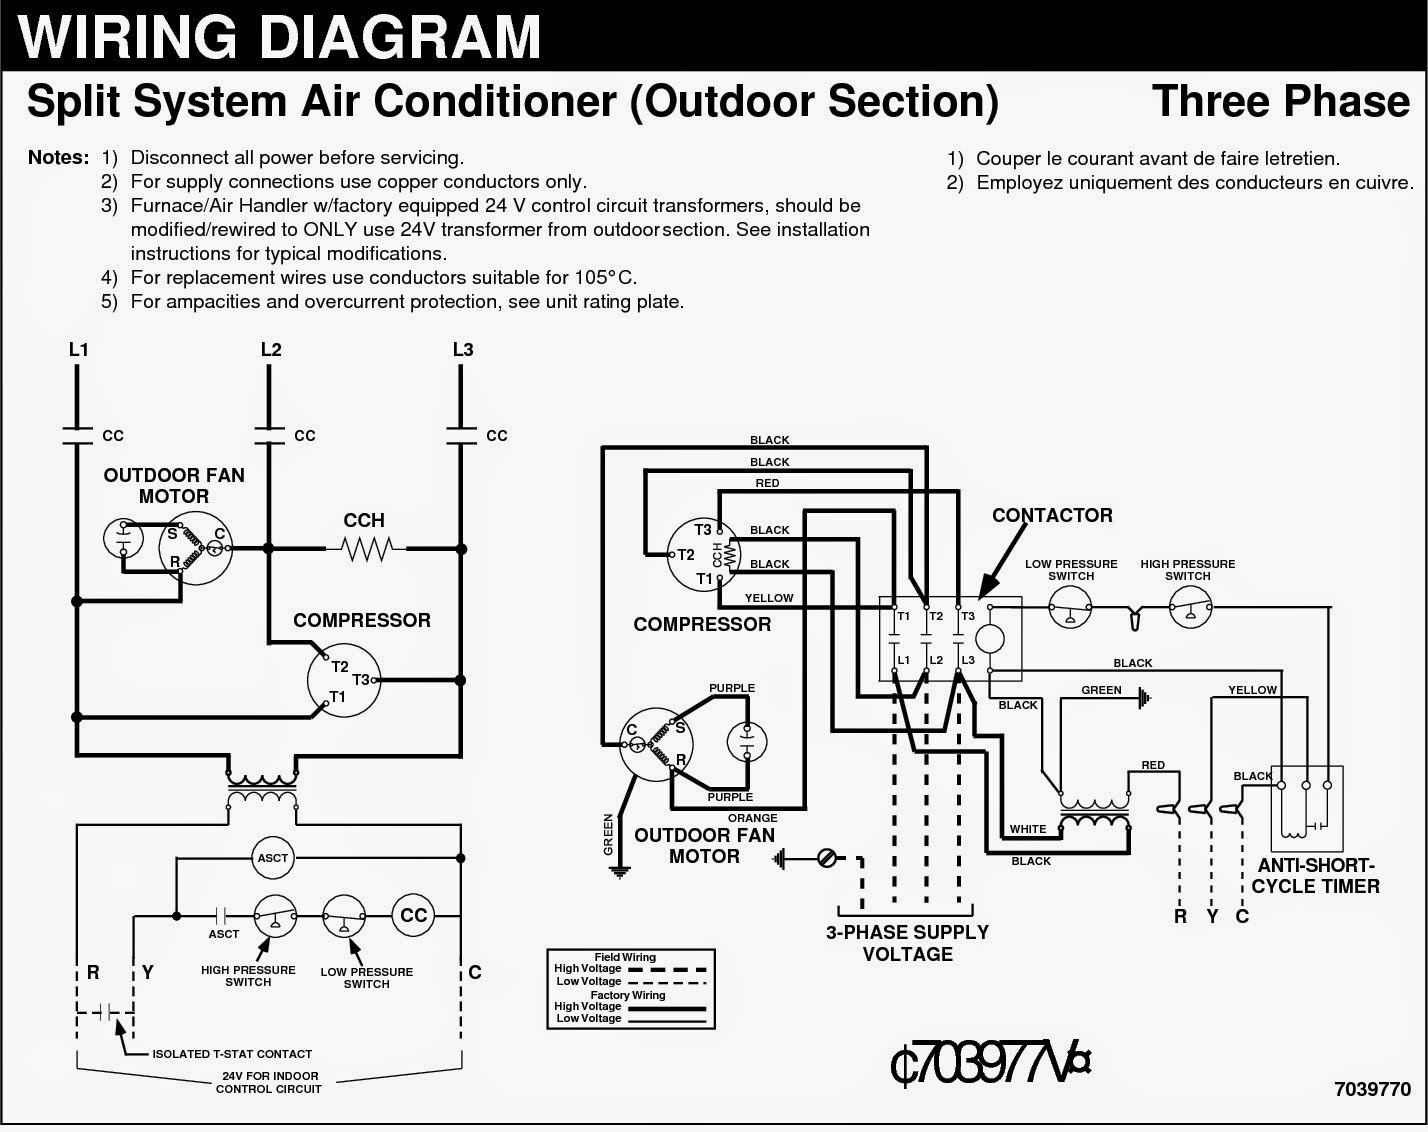 Home Air Conditioner Wiring Diagram - Wiring Diagrams Hubs - Ac Wiring Diagram